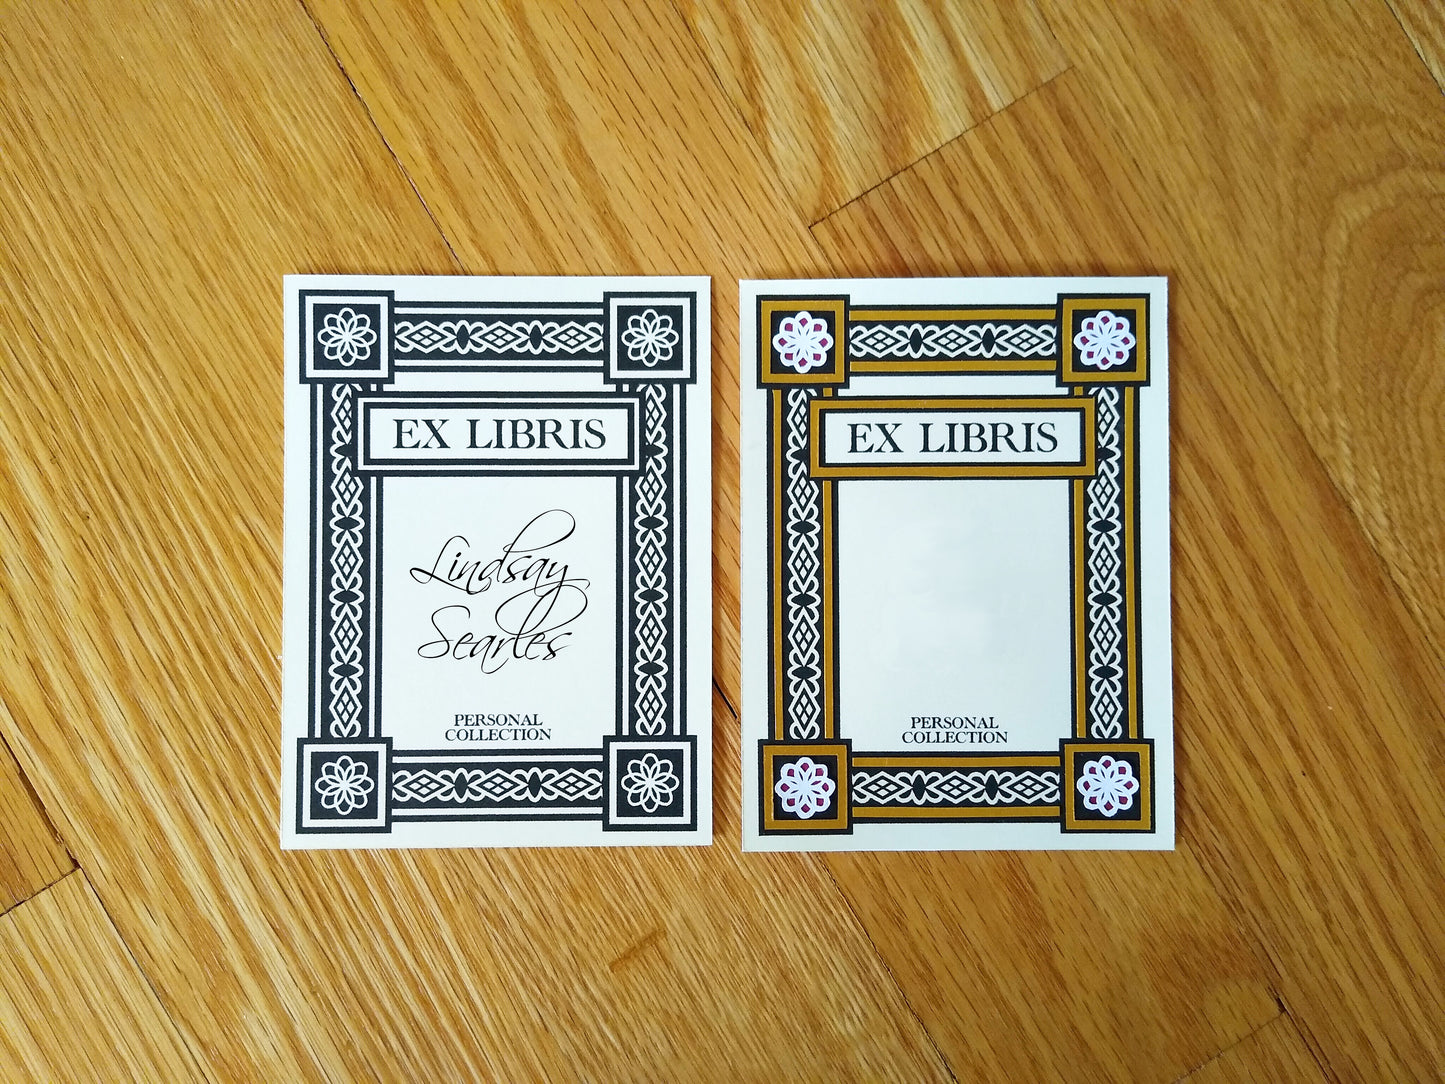 One black and white bookplate and one gold embellished bookplate are side by side.  The bookplates say Ex Libris and Personal Collection, and have a thick art deco border around the edges.